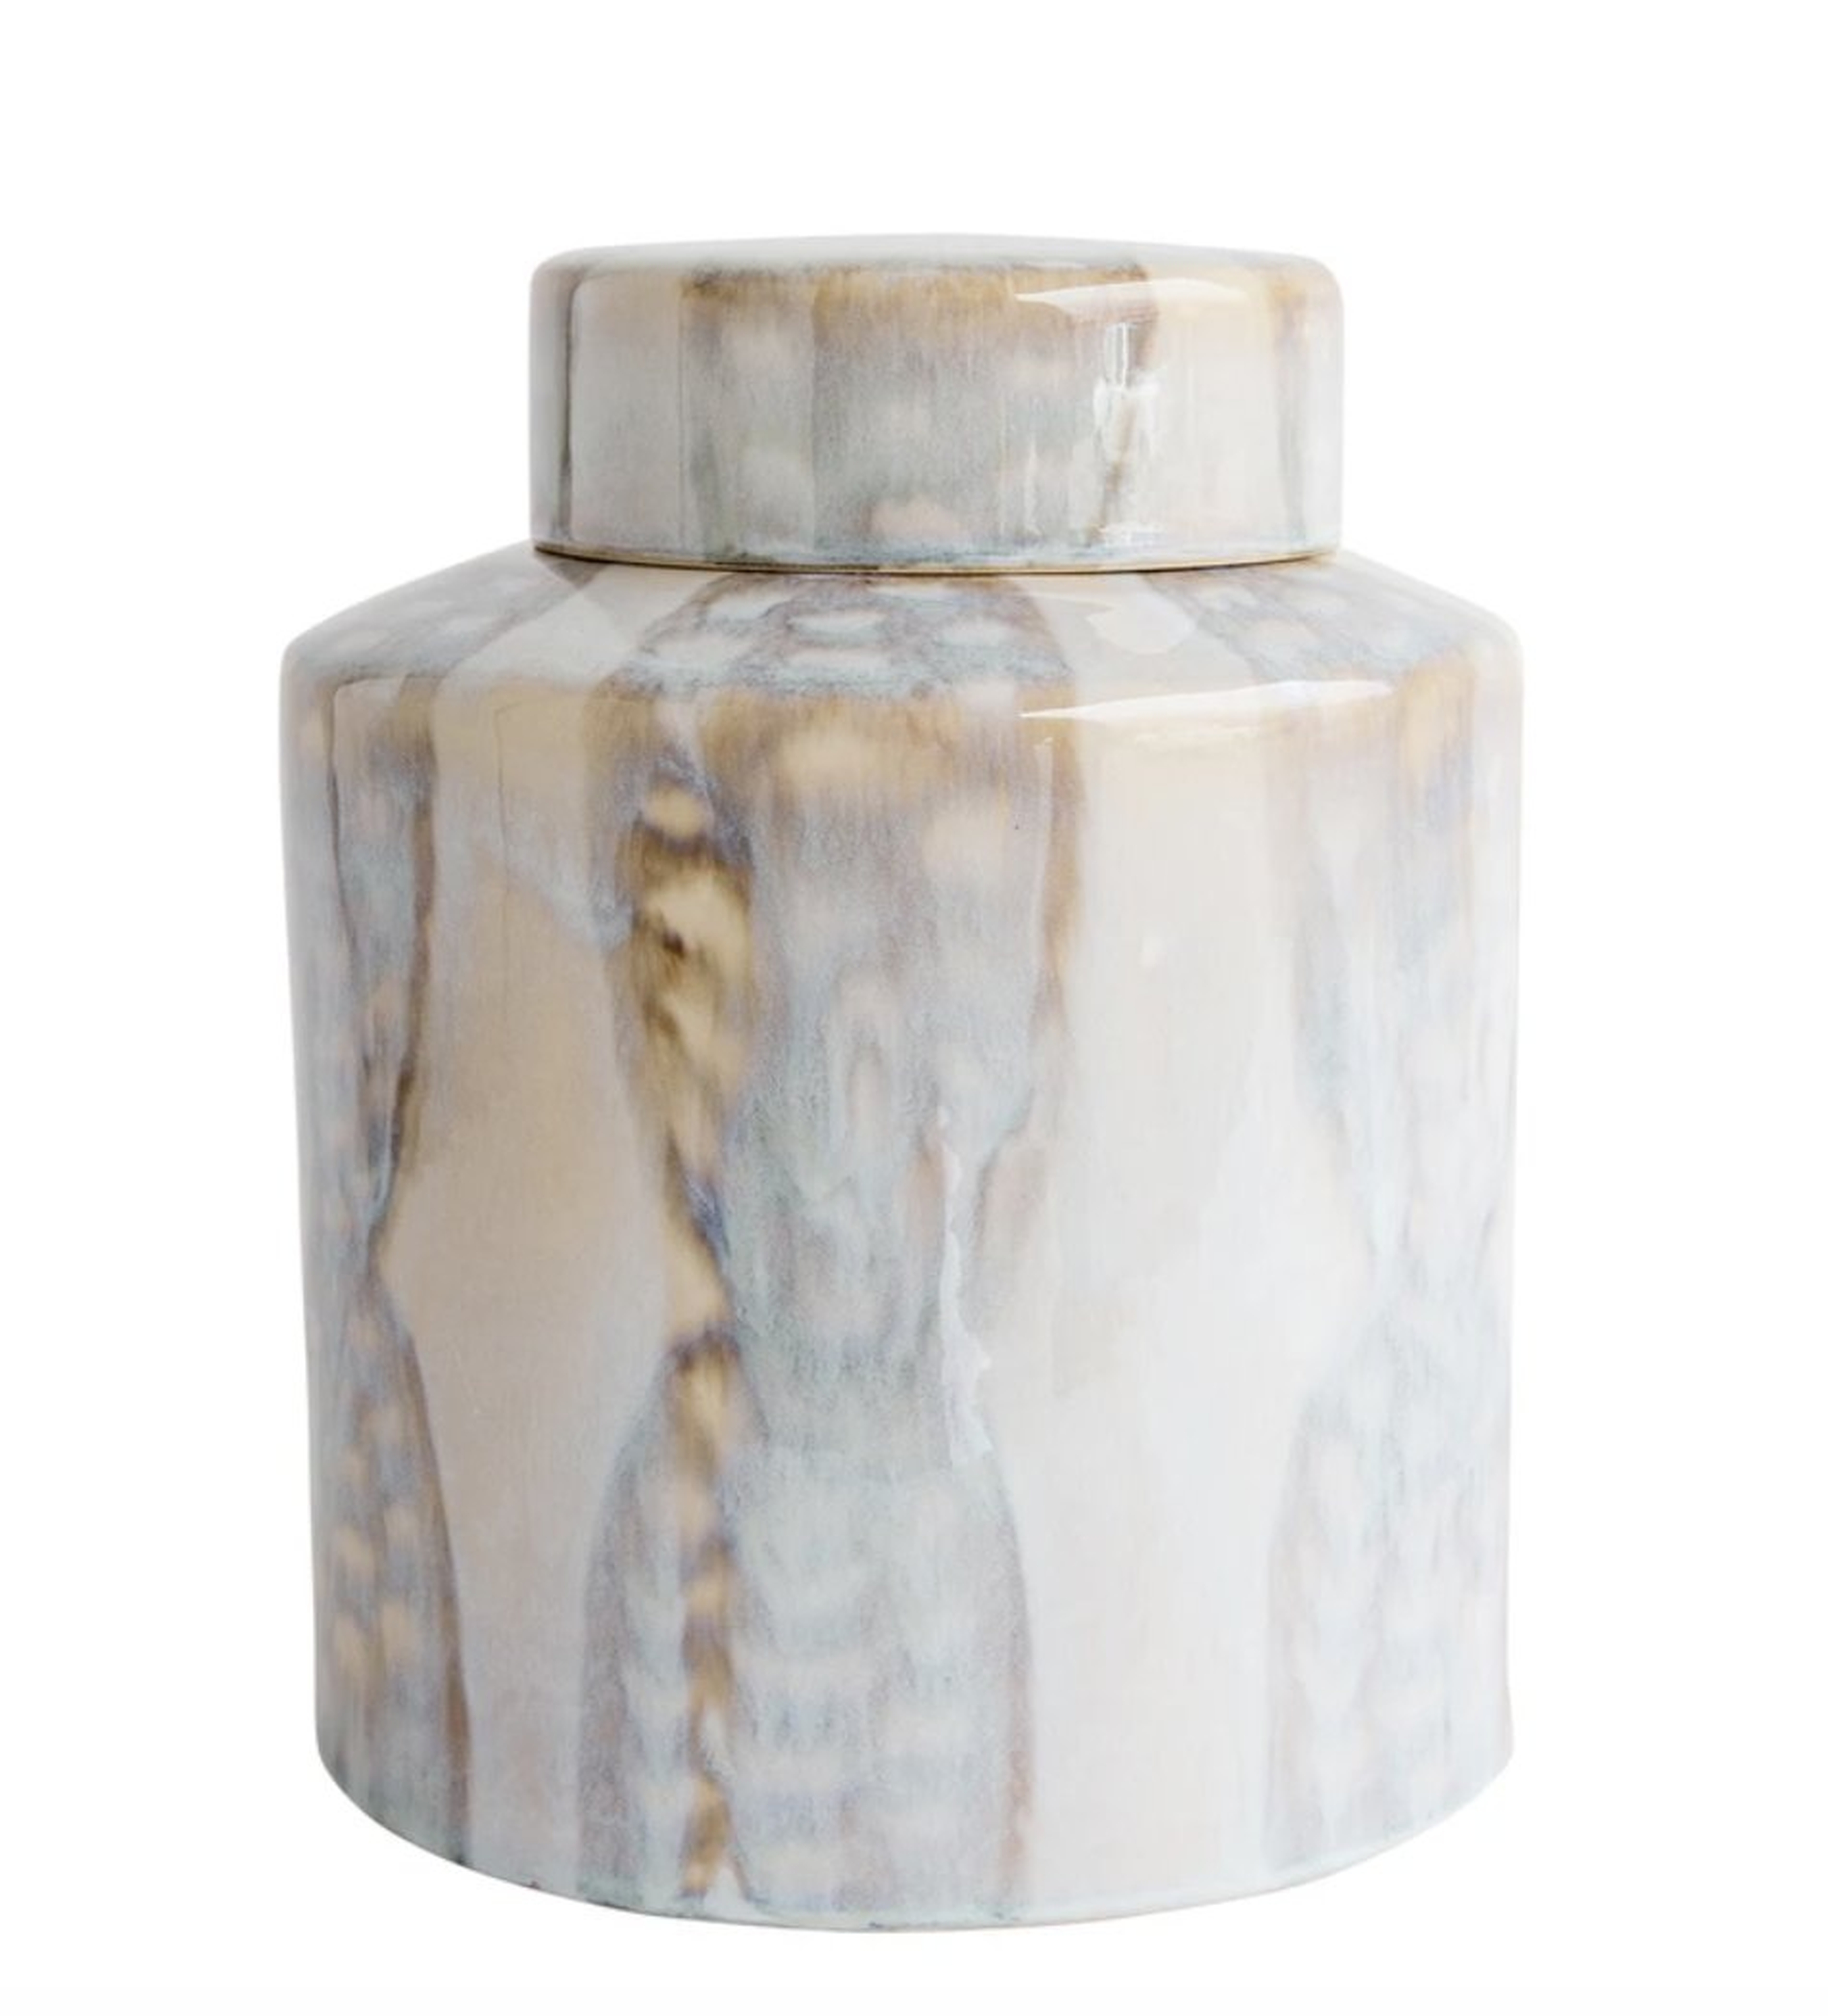 REACTIVE GLAZED GINGER JAR - SMALL - McGee & Co.